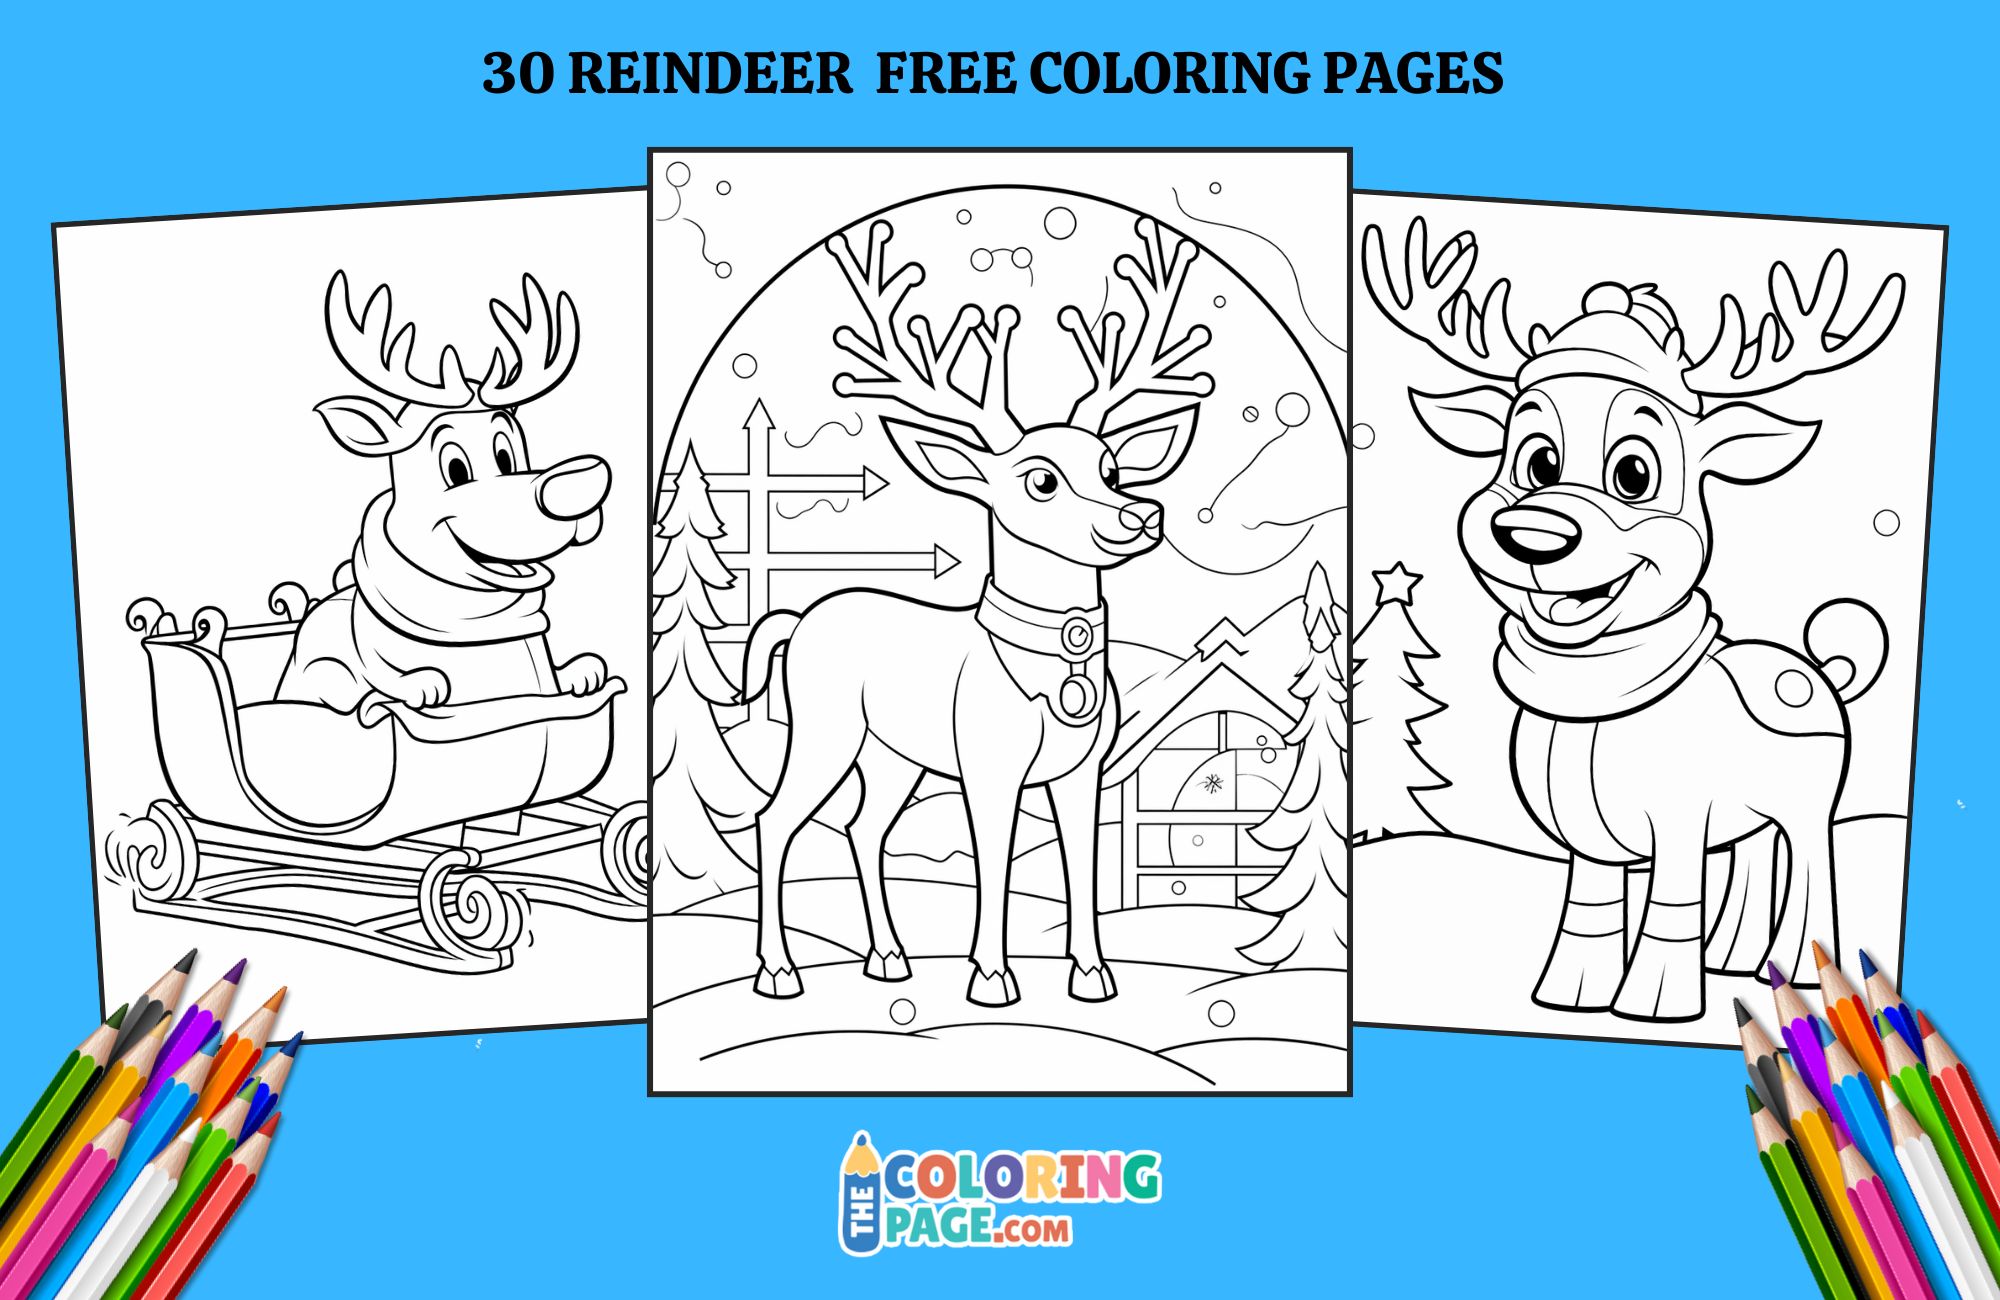 30 Free Reindeer Coloring Pages for kids